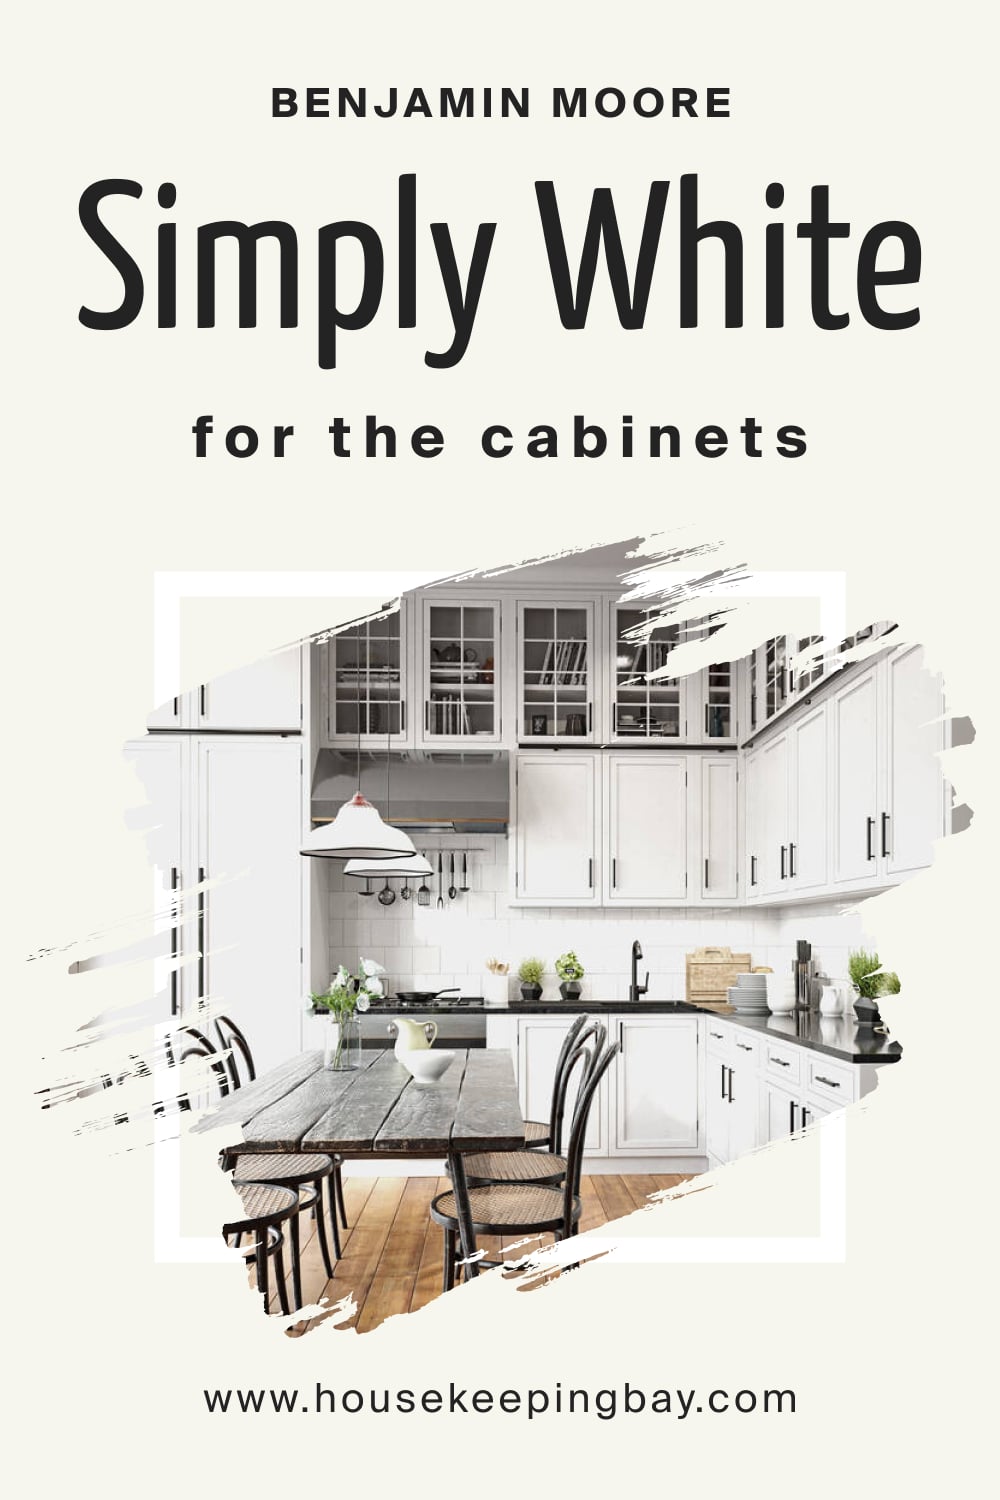 Benjamin Moore. Simply White OC 117 for the Cabinets